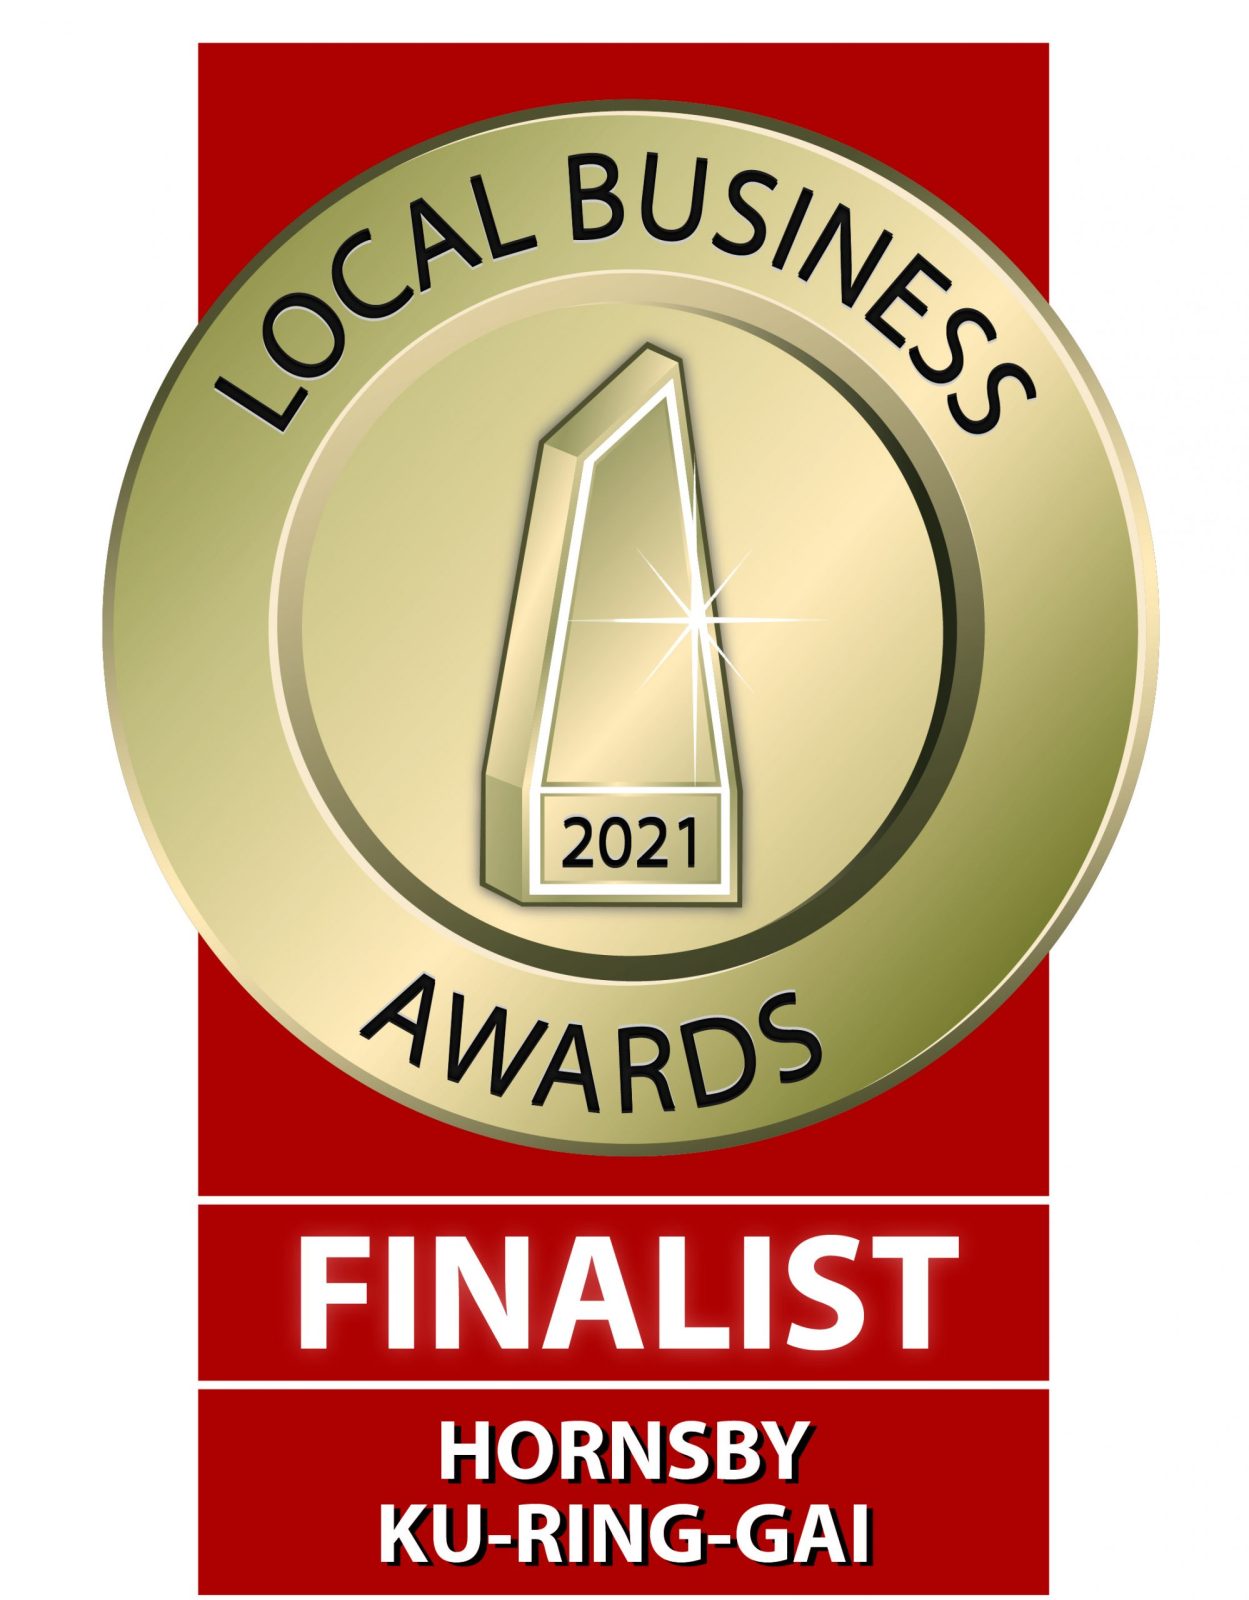 local business awards 2021